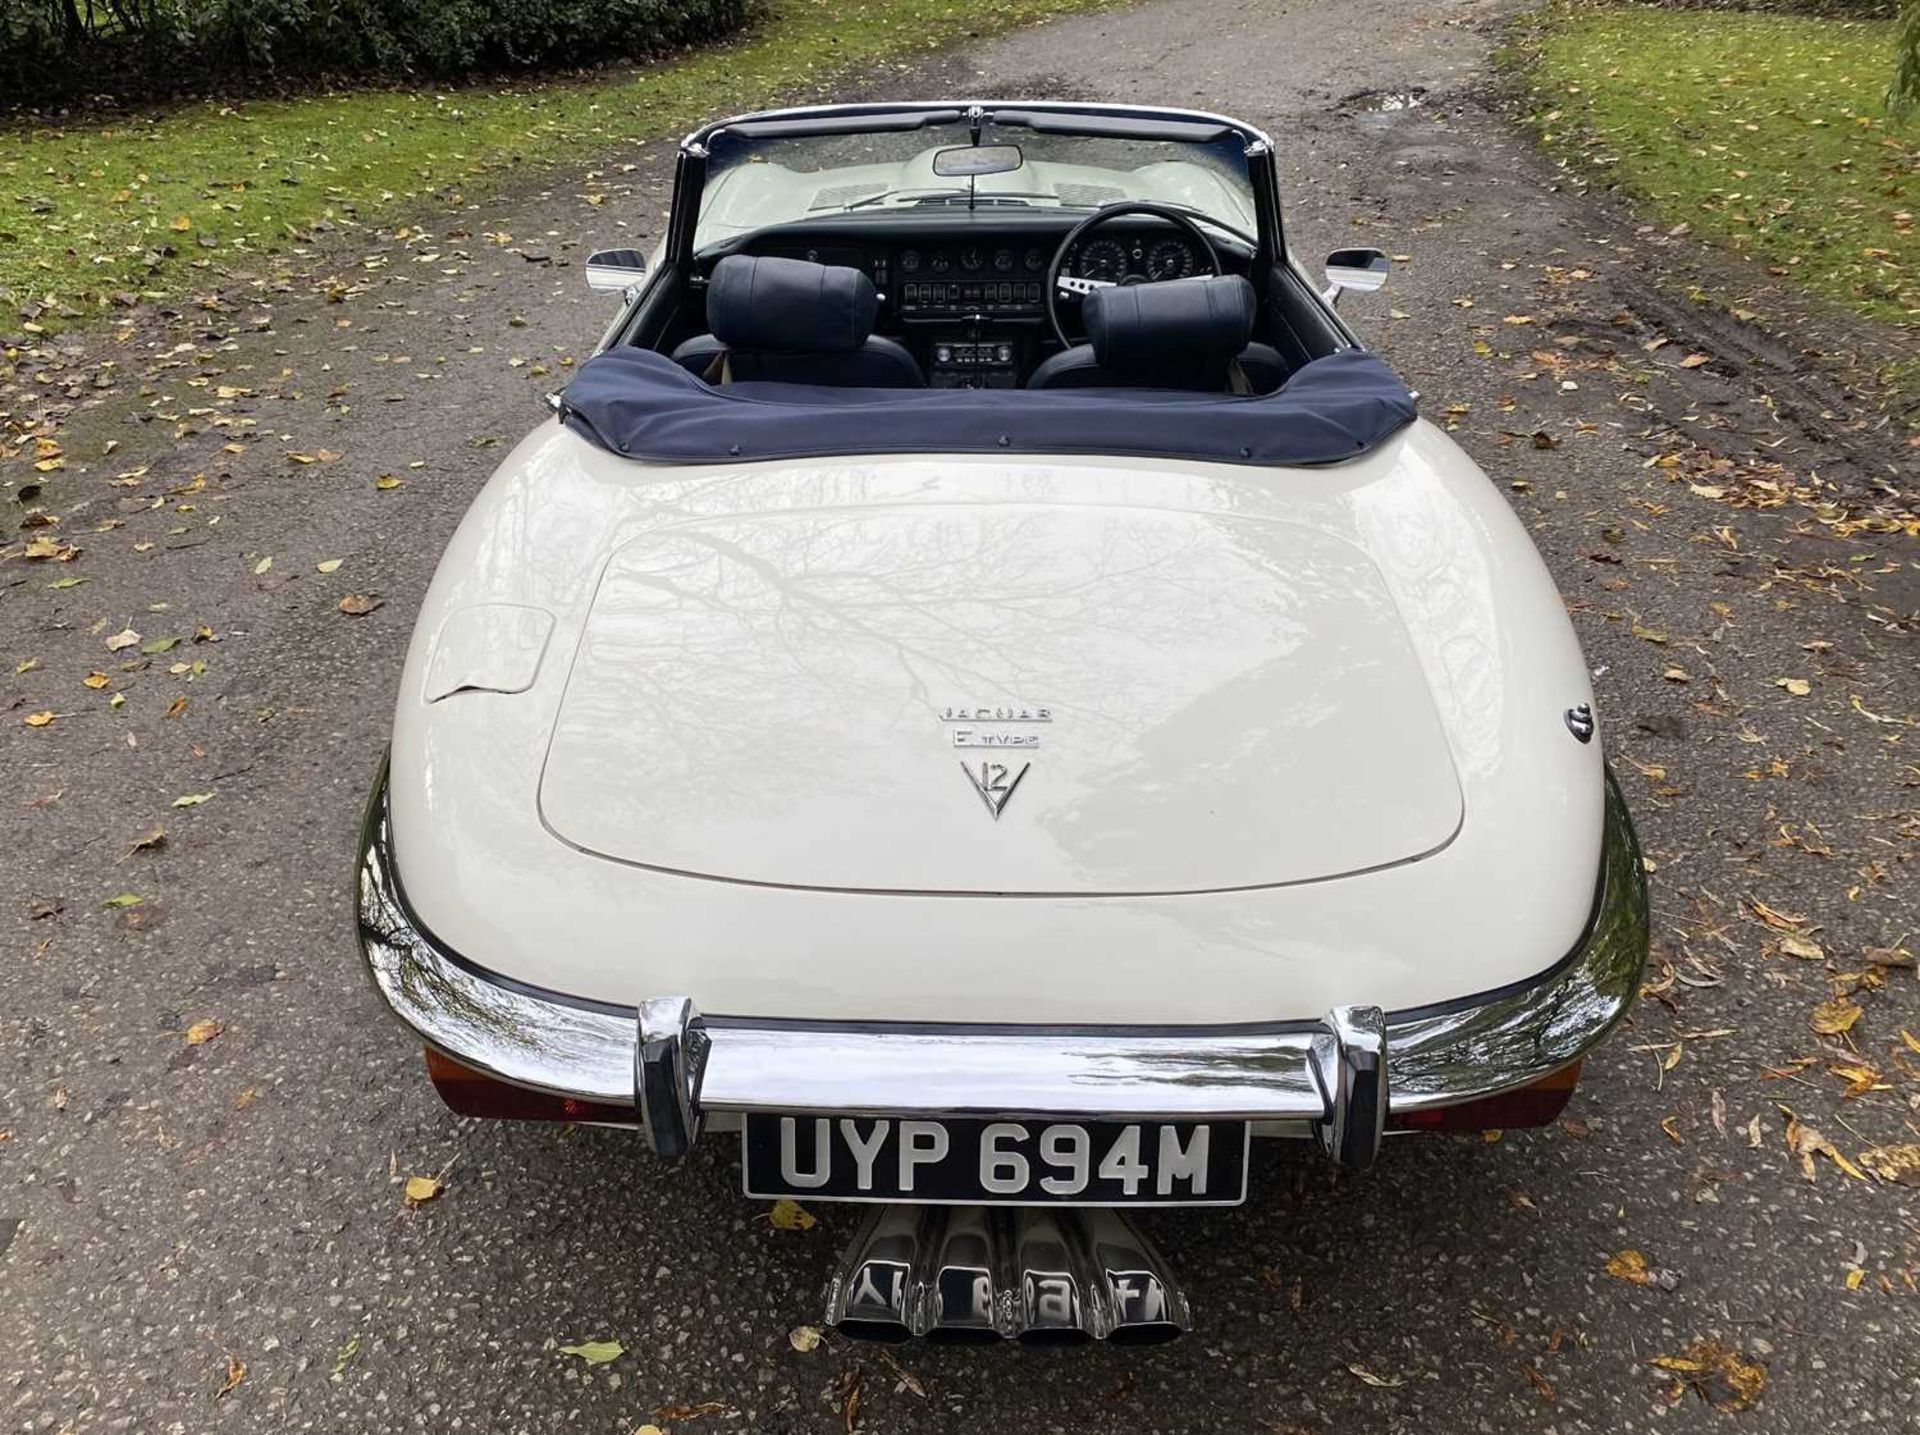 1973 Jaguar E-Type V12 Roadster As seen in Only Fools and Horses - Image 30 of 105